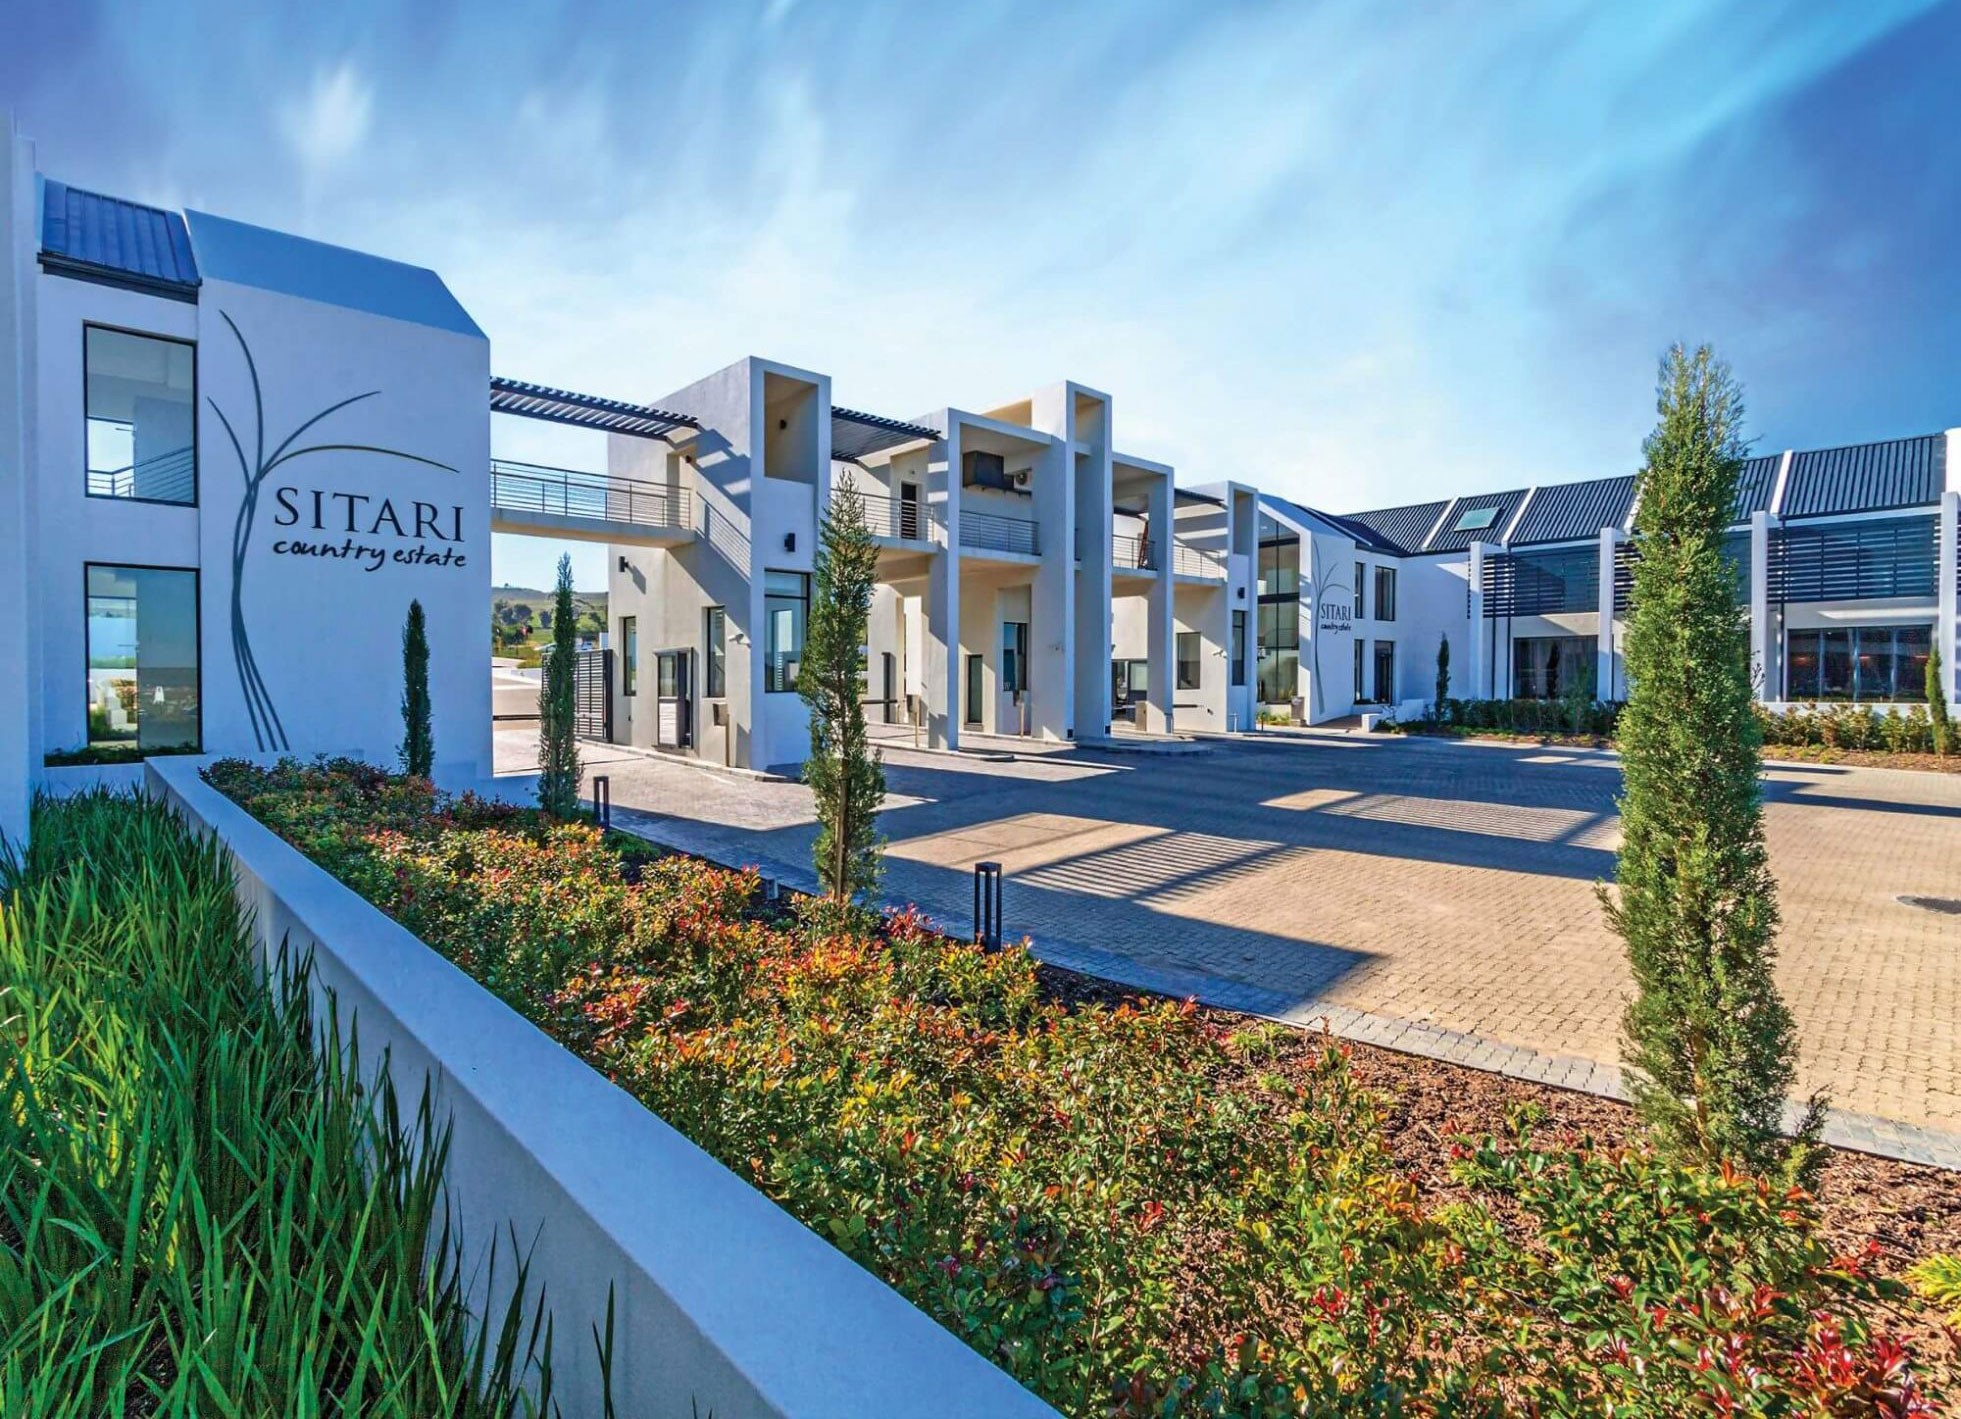 Sitari Country Estate – a prestigious, award-winning lifestyle estate located near Cape Town – has shown an impressive buyer interest, with more than 926 properties to the value of just over R1.286 billion sold within 56 months. The lifestyle that can be enjoyed at Sitari Country Estate is a clear indication of why this estate is so sought after.